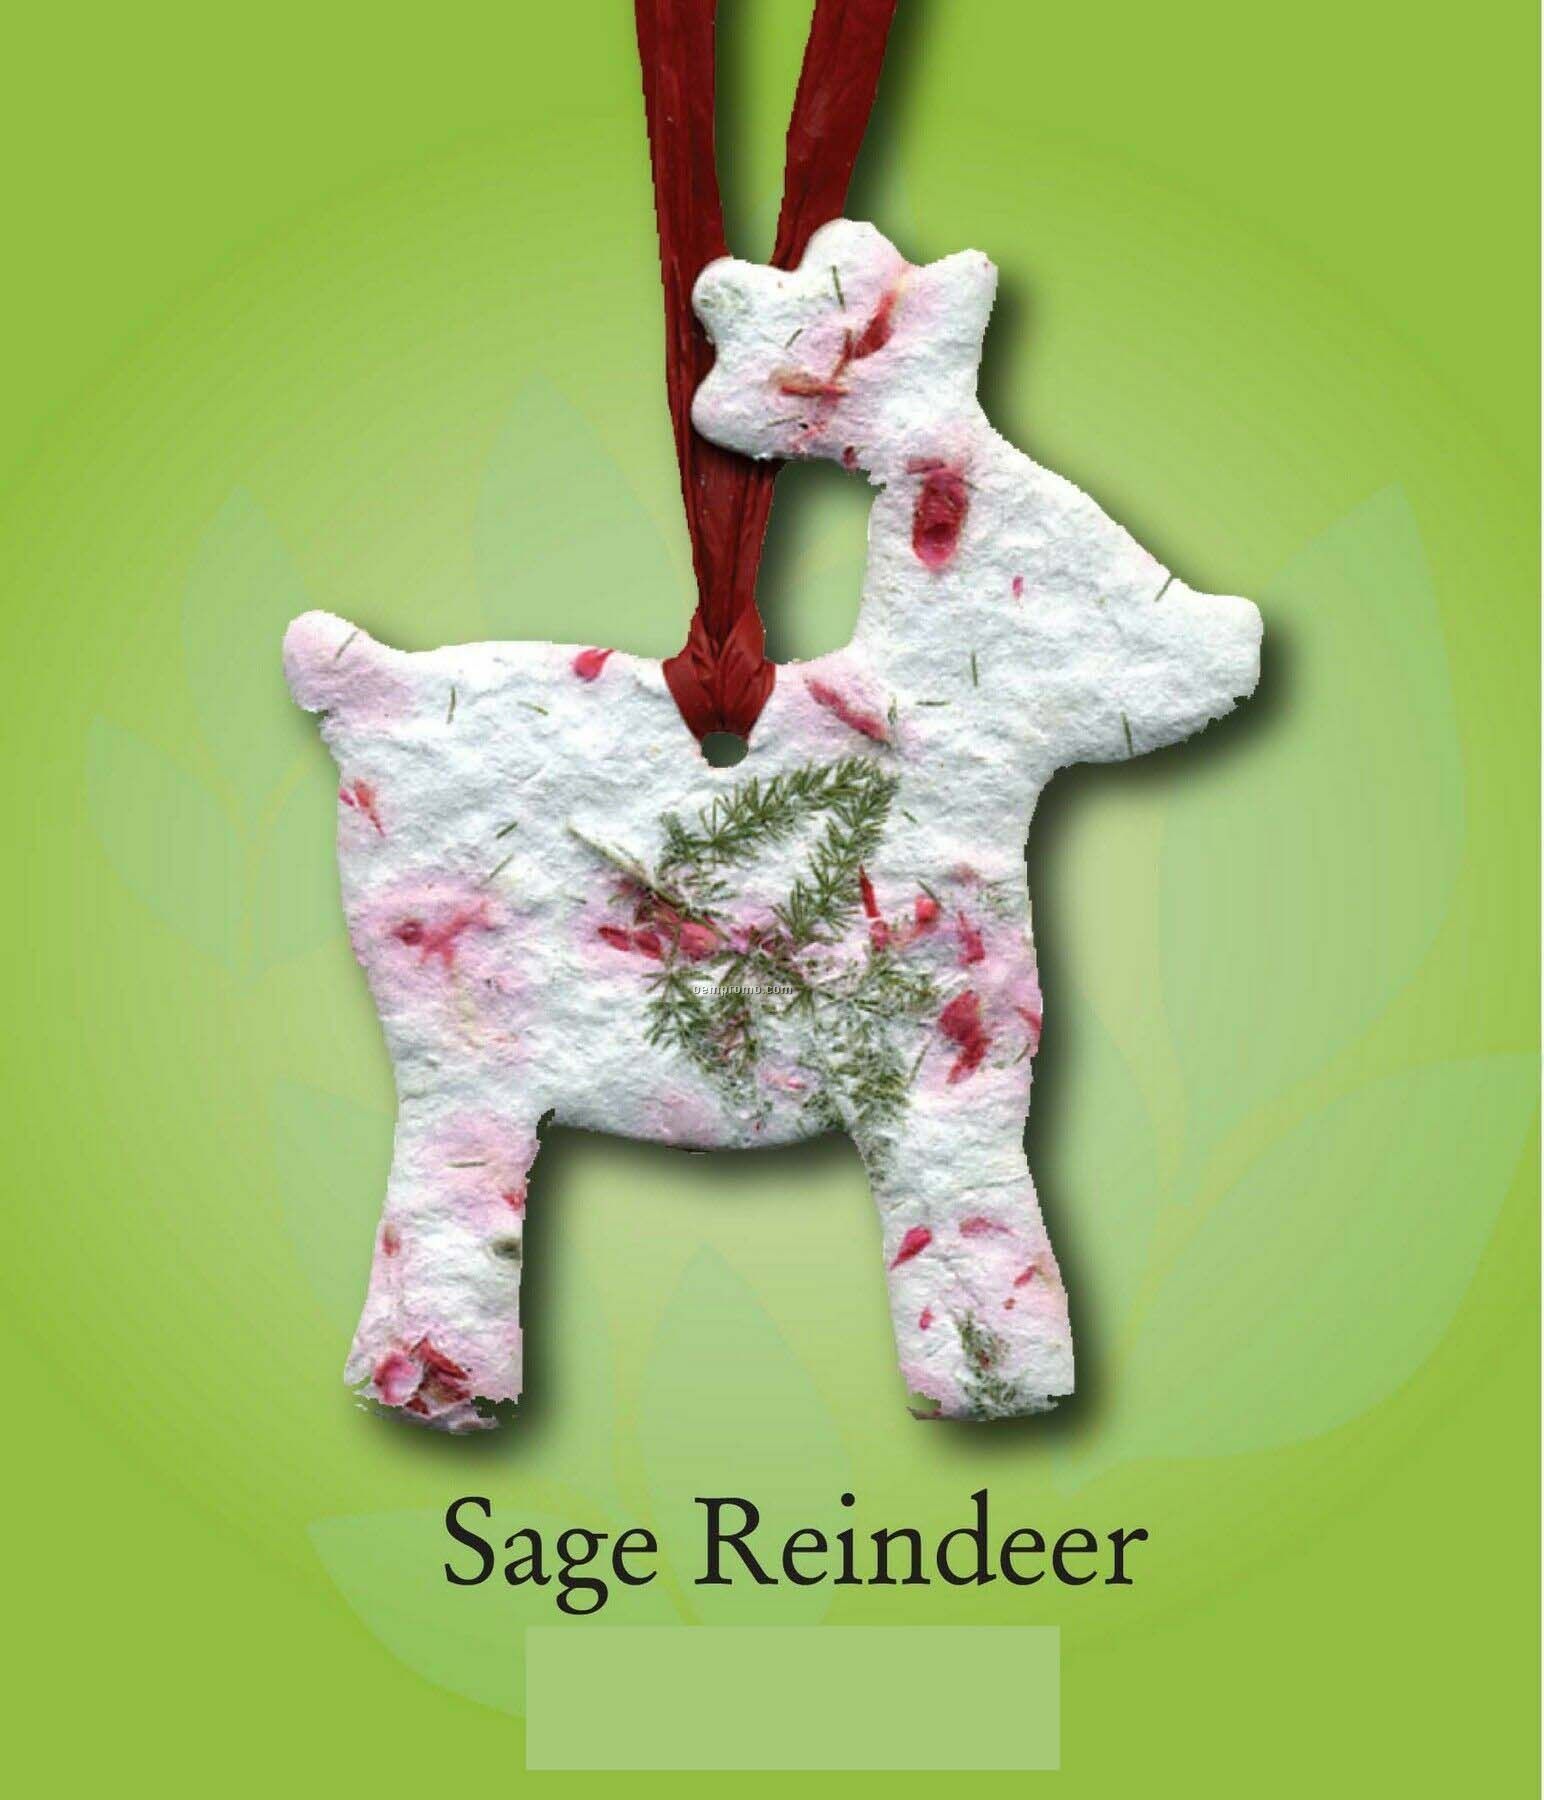 Winter Sage Reindeer Ornament With Embedded Seed